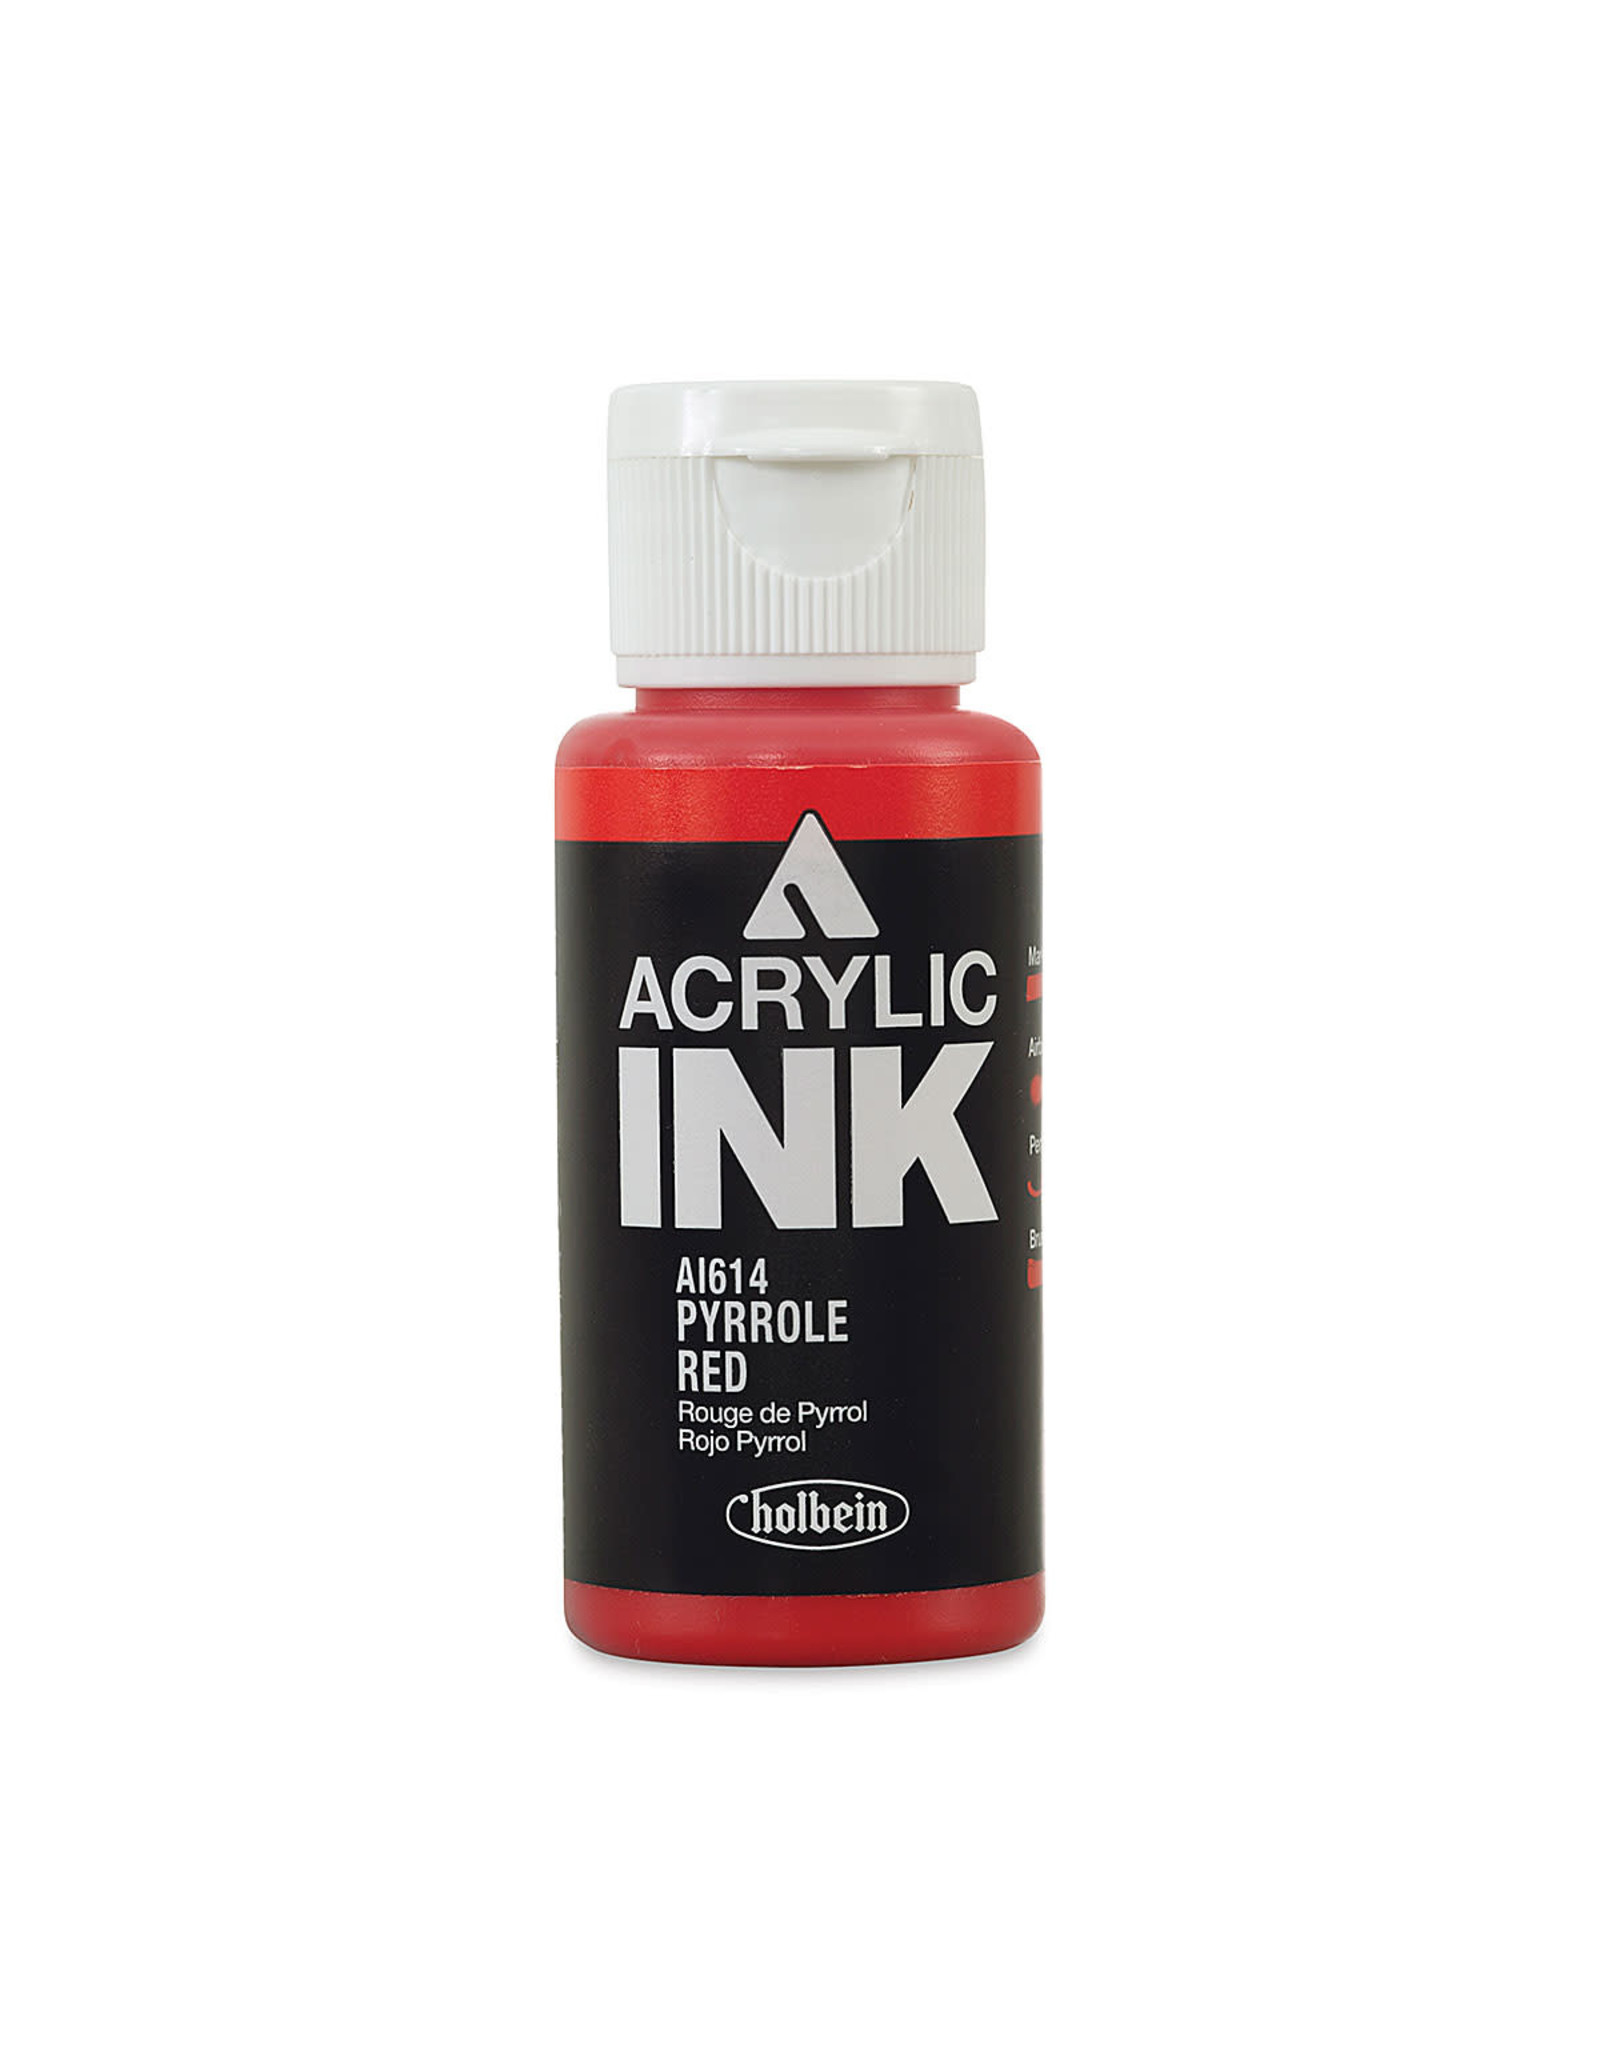 CLEARANCE Holbein Acrylic Ink, Pyrrole Red, 30ml